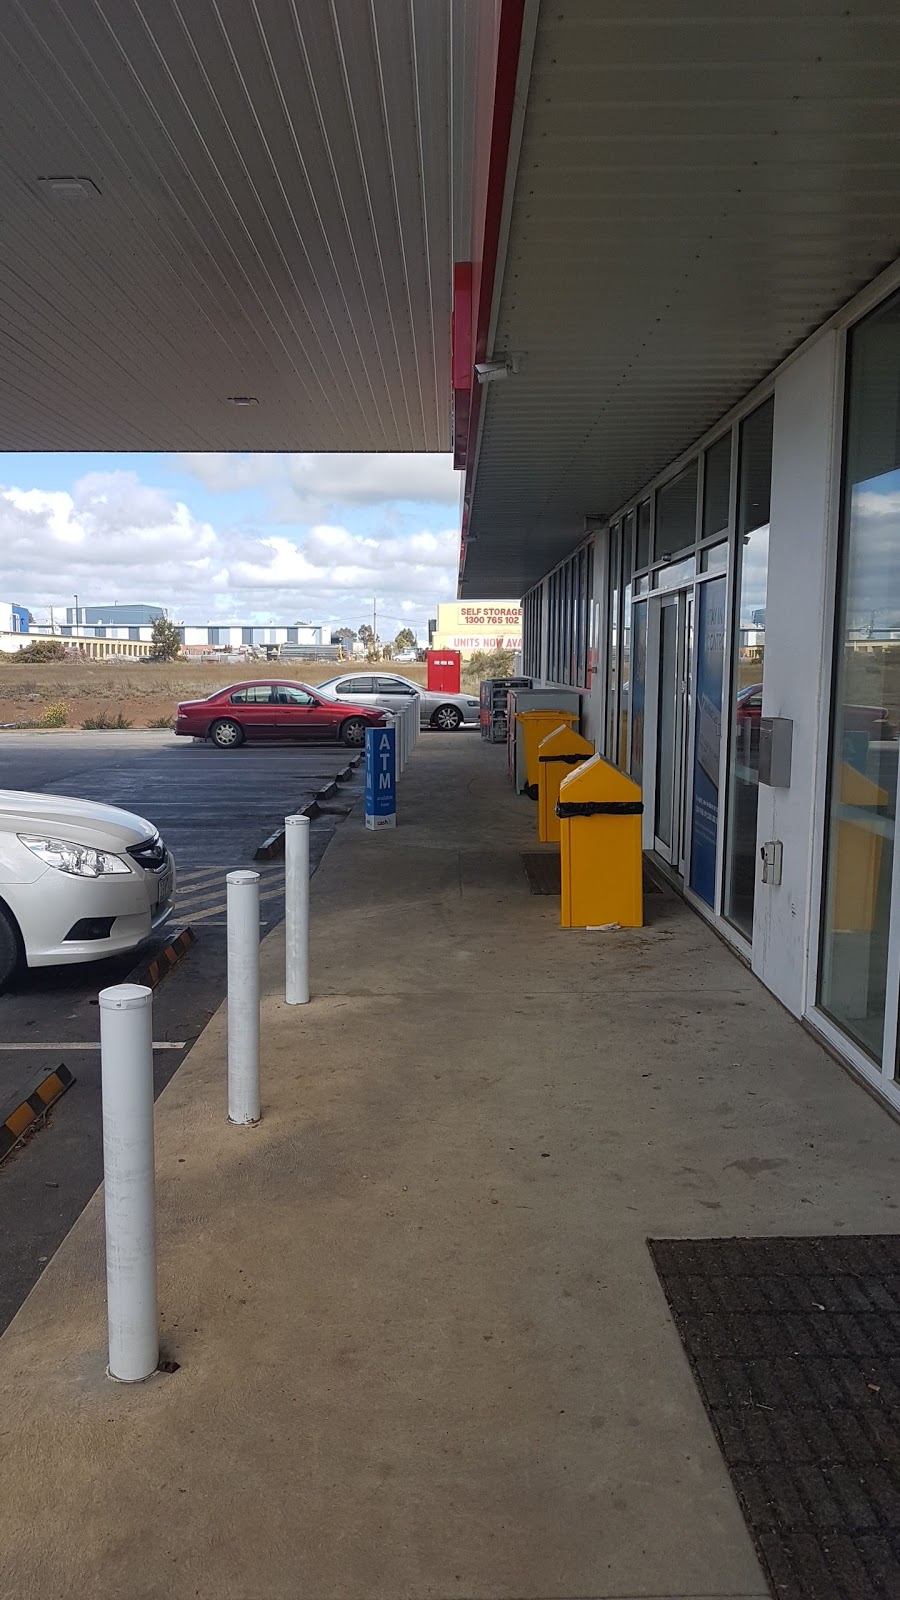 United (Pie Face) | gas station | 25/51 Learmonth Rd, Wendouree VIC 3355, Australia | 0386912029 OR +61 3 8691 2029